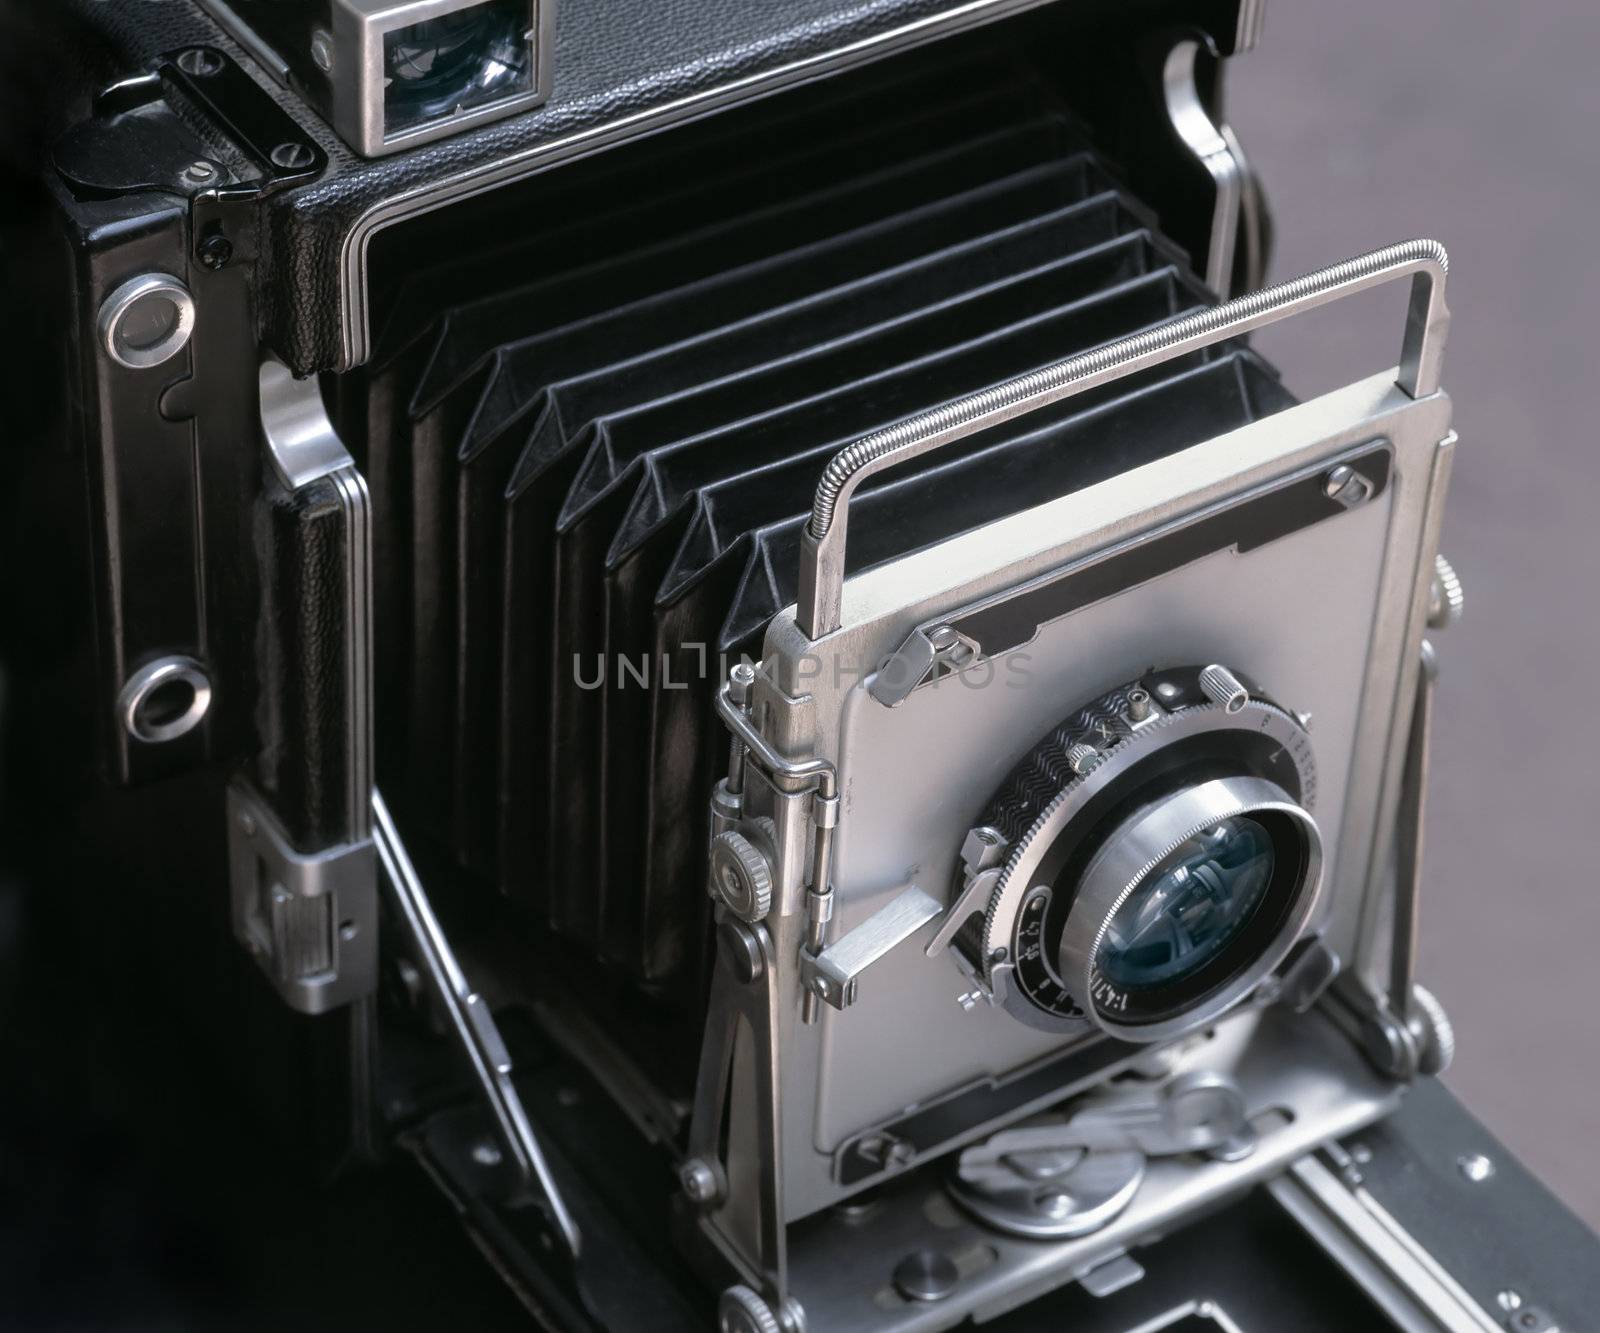 Image of an antique 4x6-inch camera.
